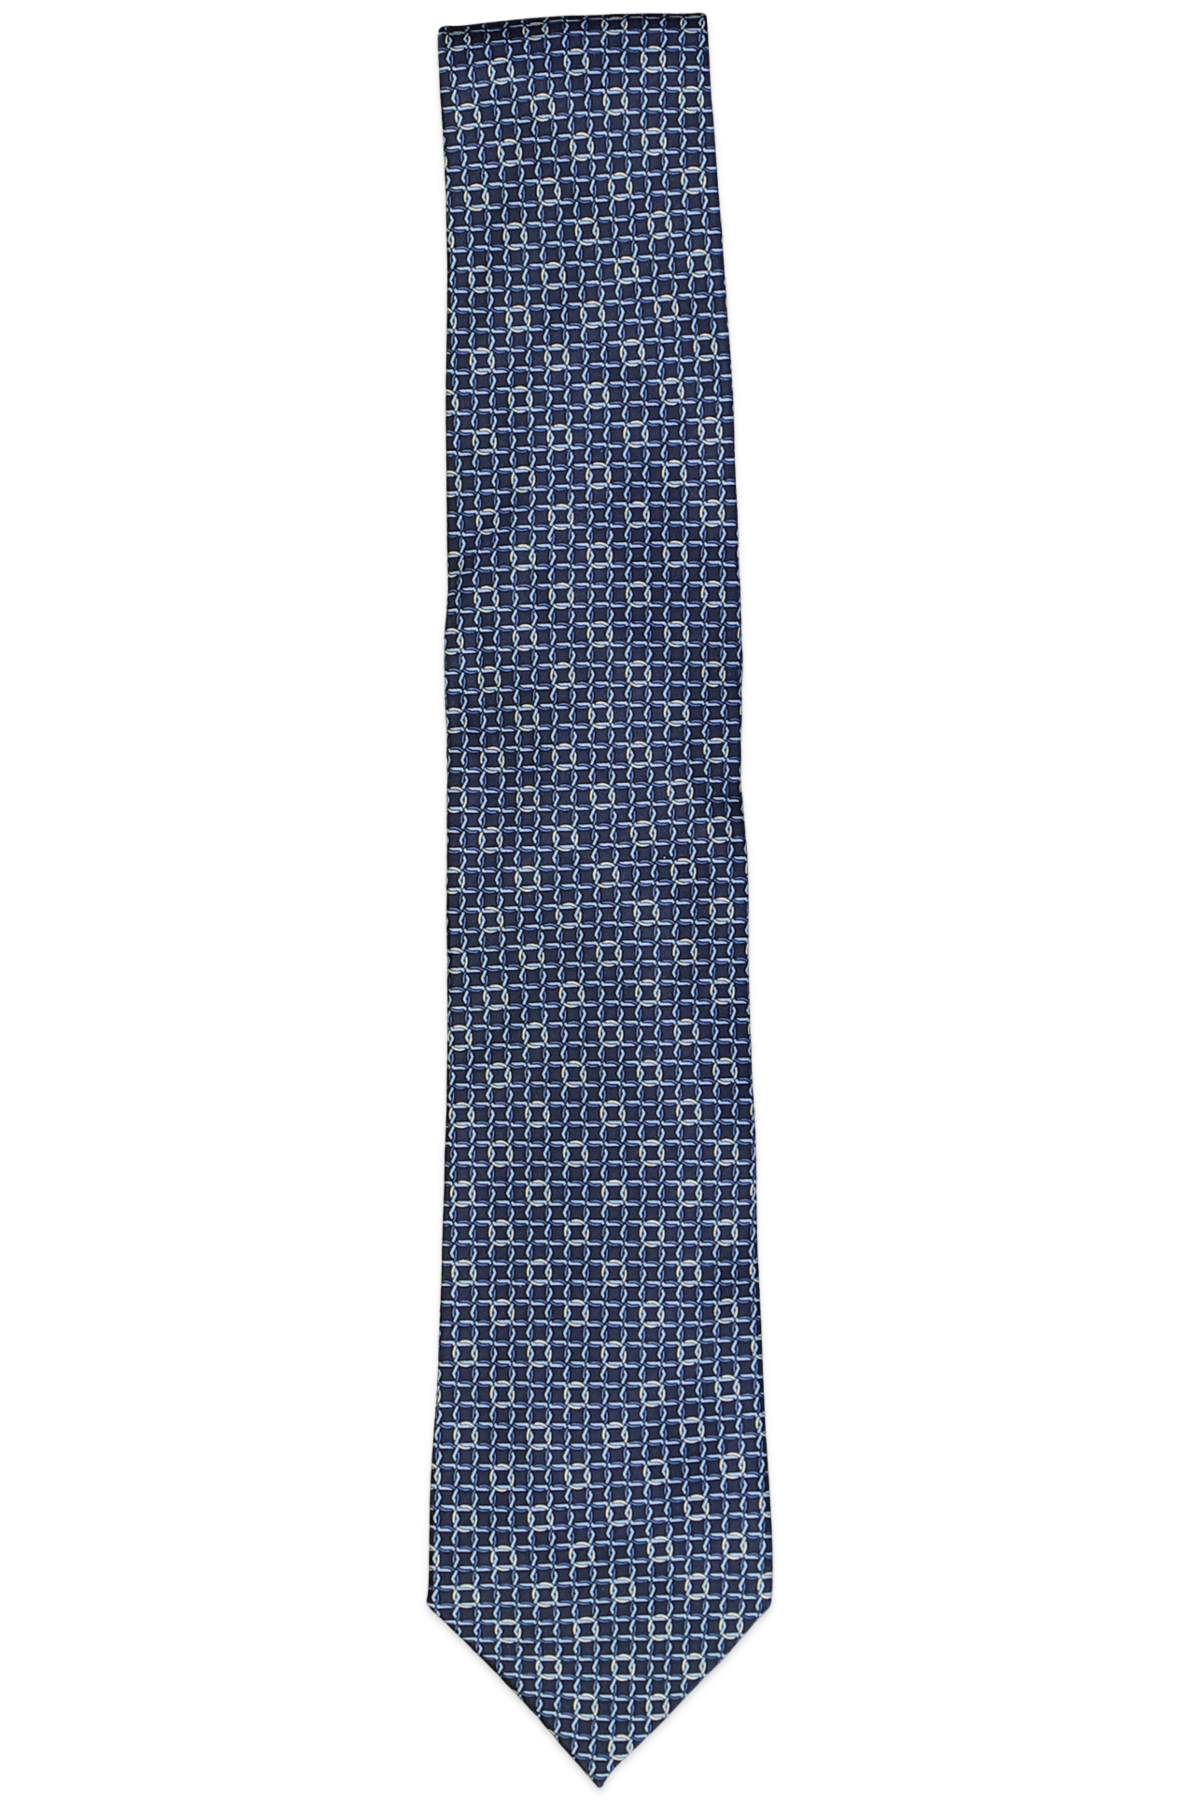 The Men's Store Chain Link Silk Classic Tie Navy/Blue